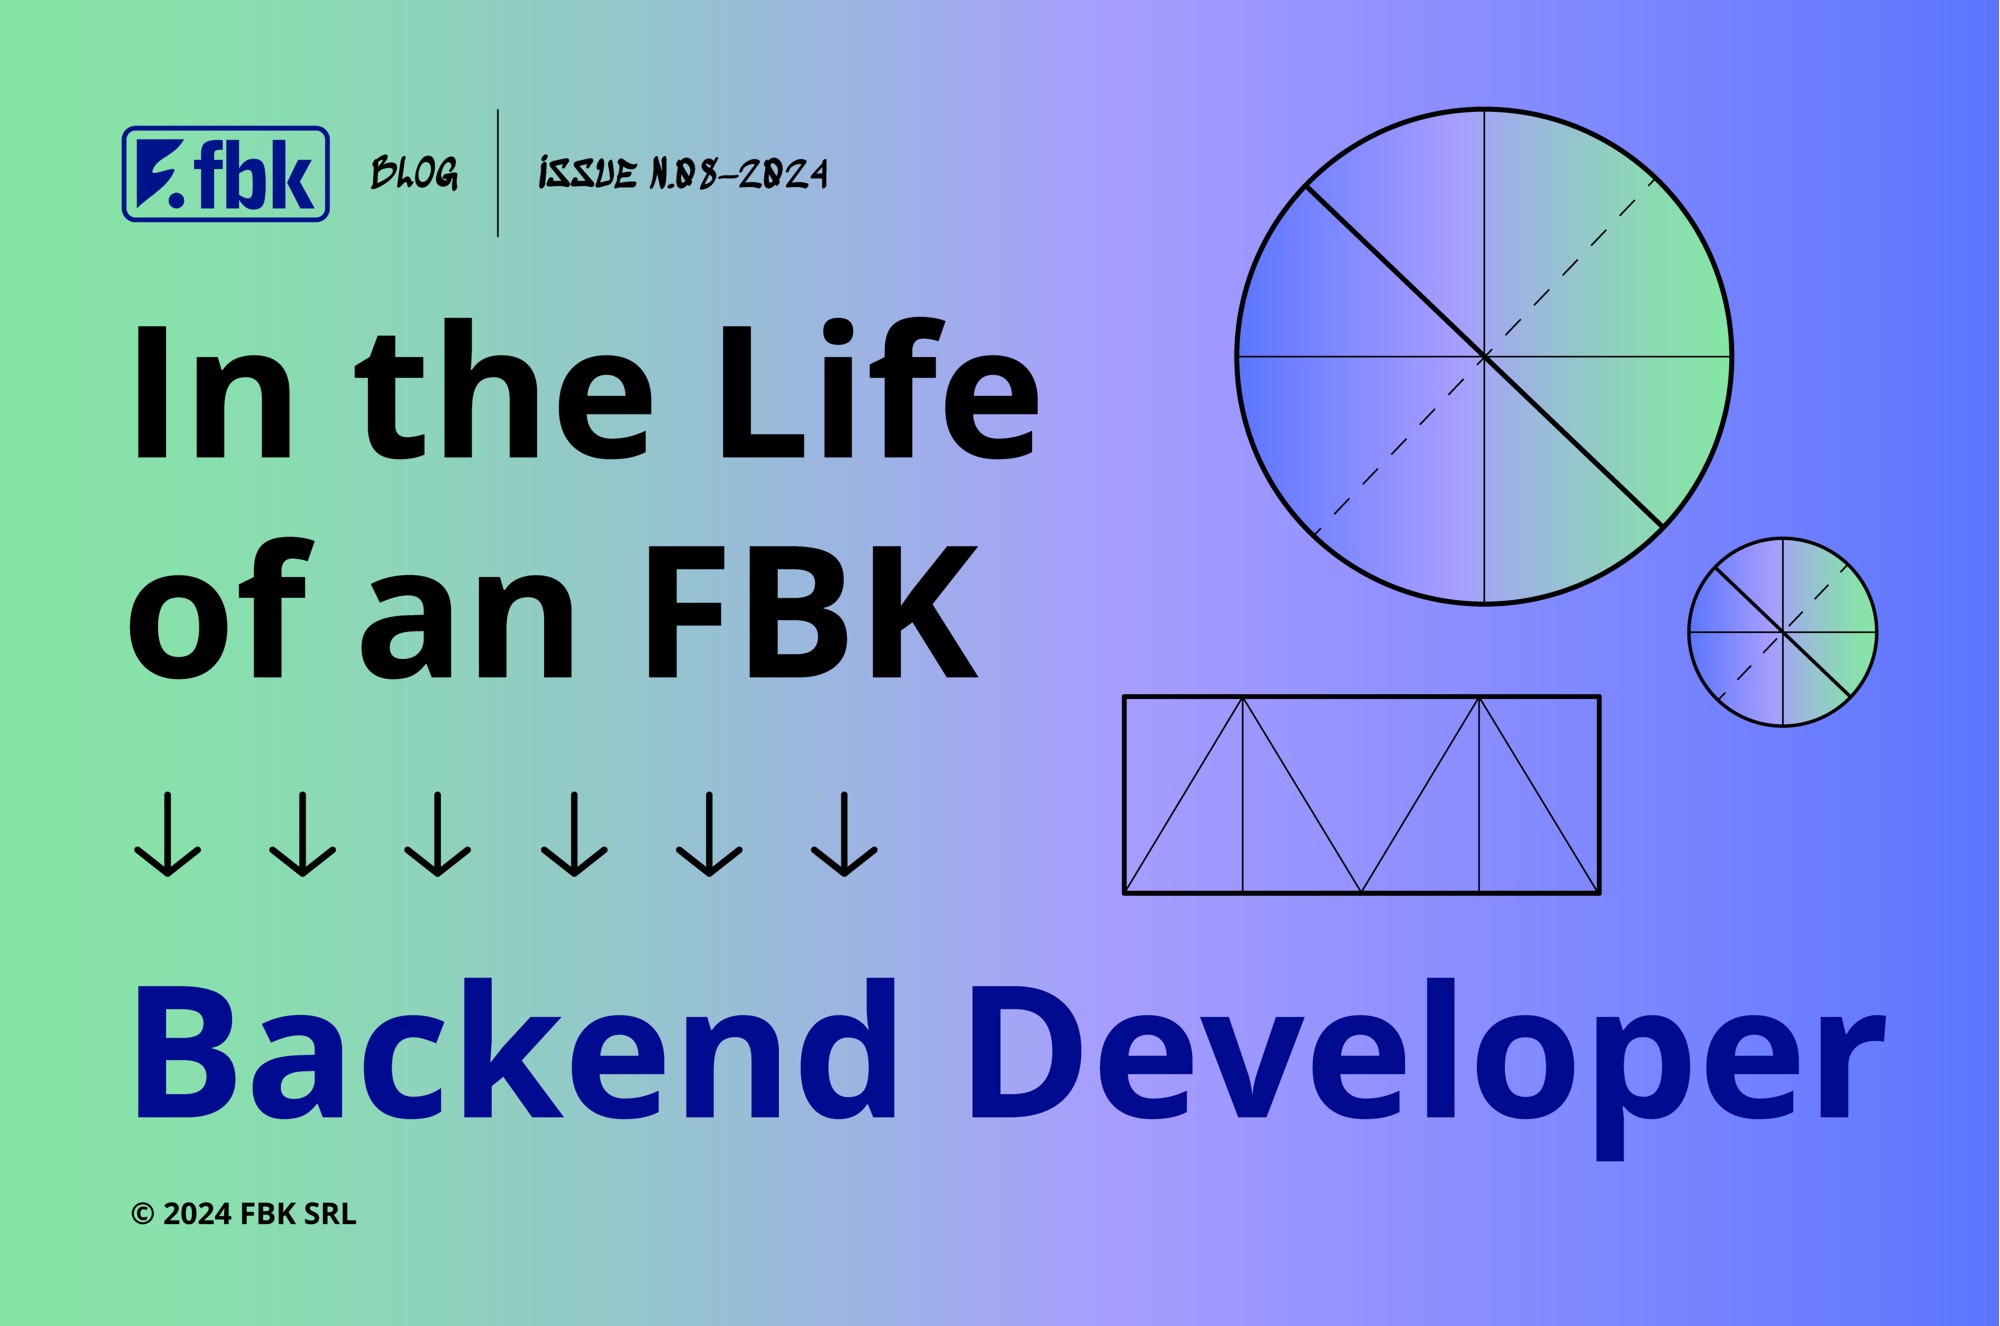 A Day in the Life of an FBK Backend Developer